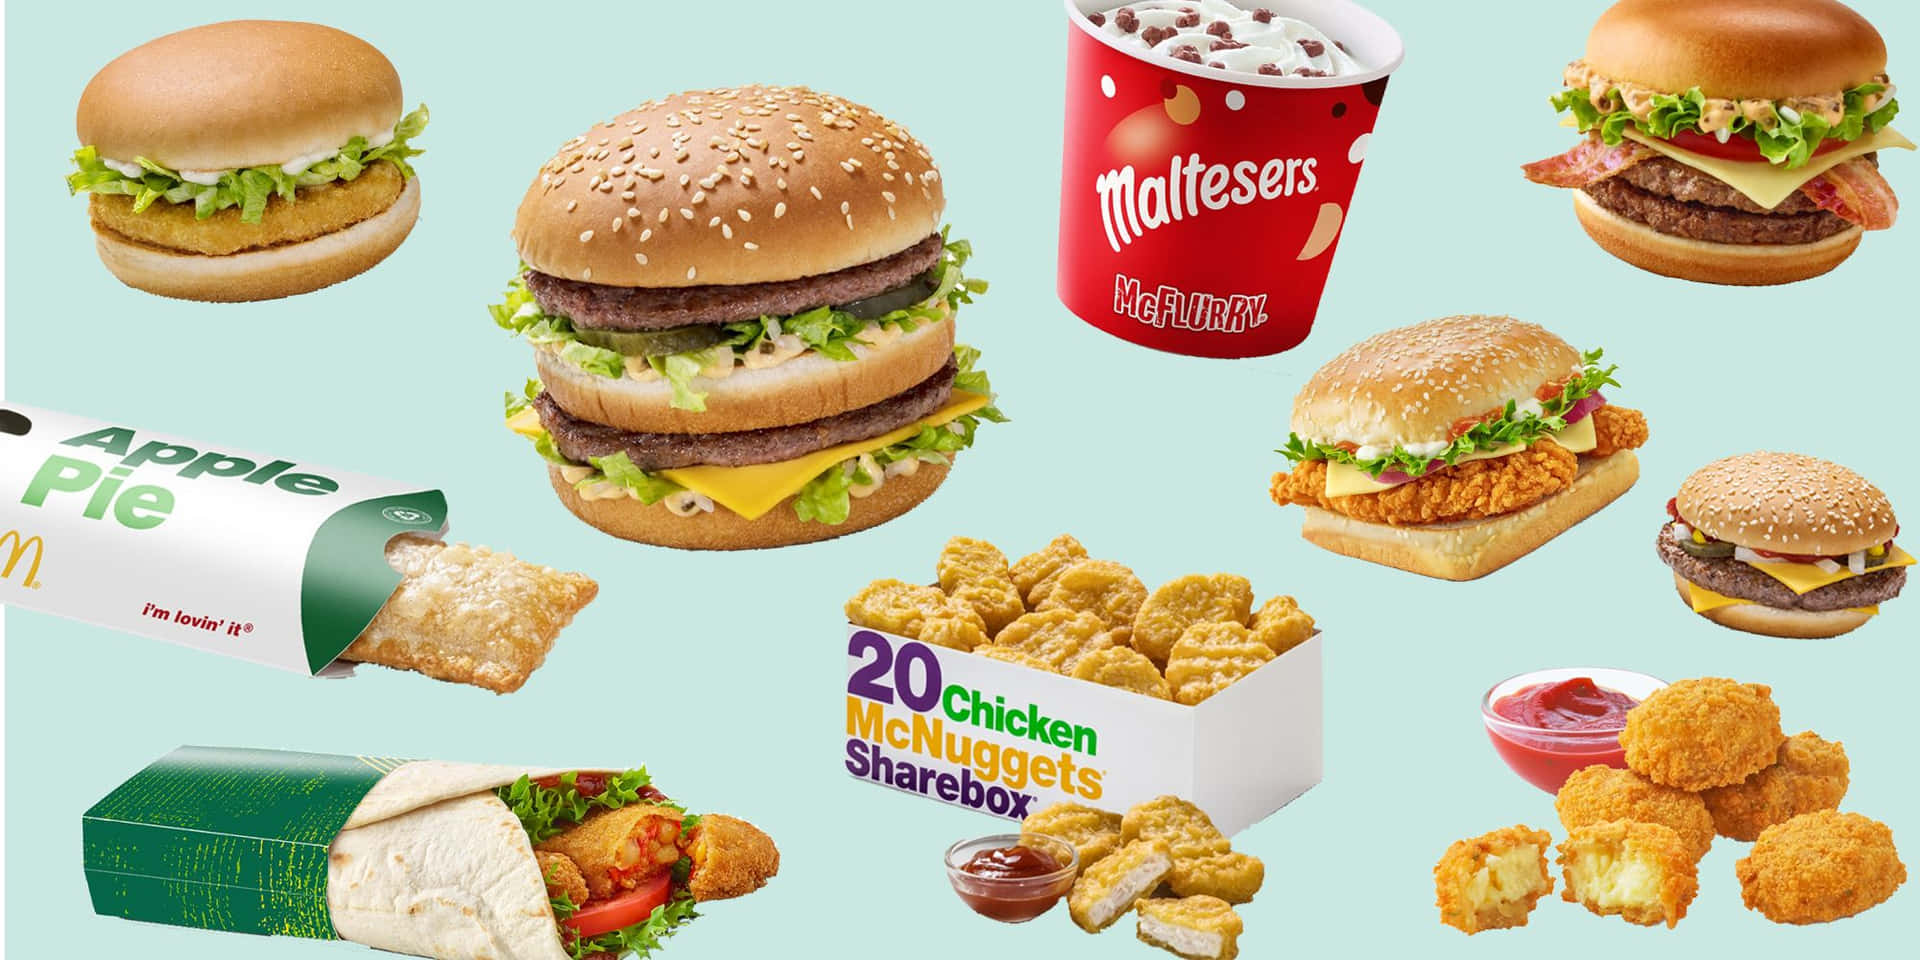 A Variety Of Fast Food Items Are Shown